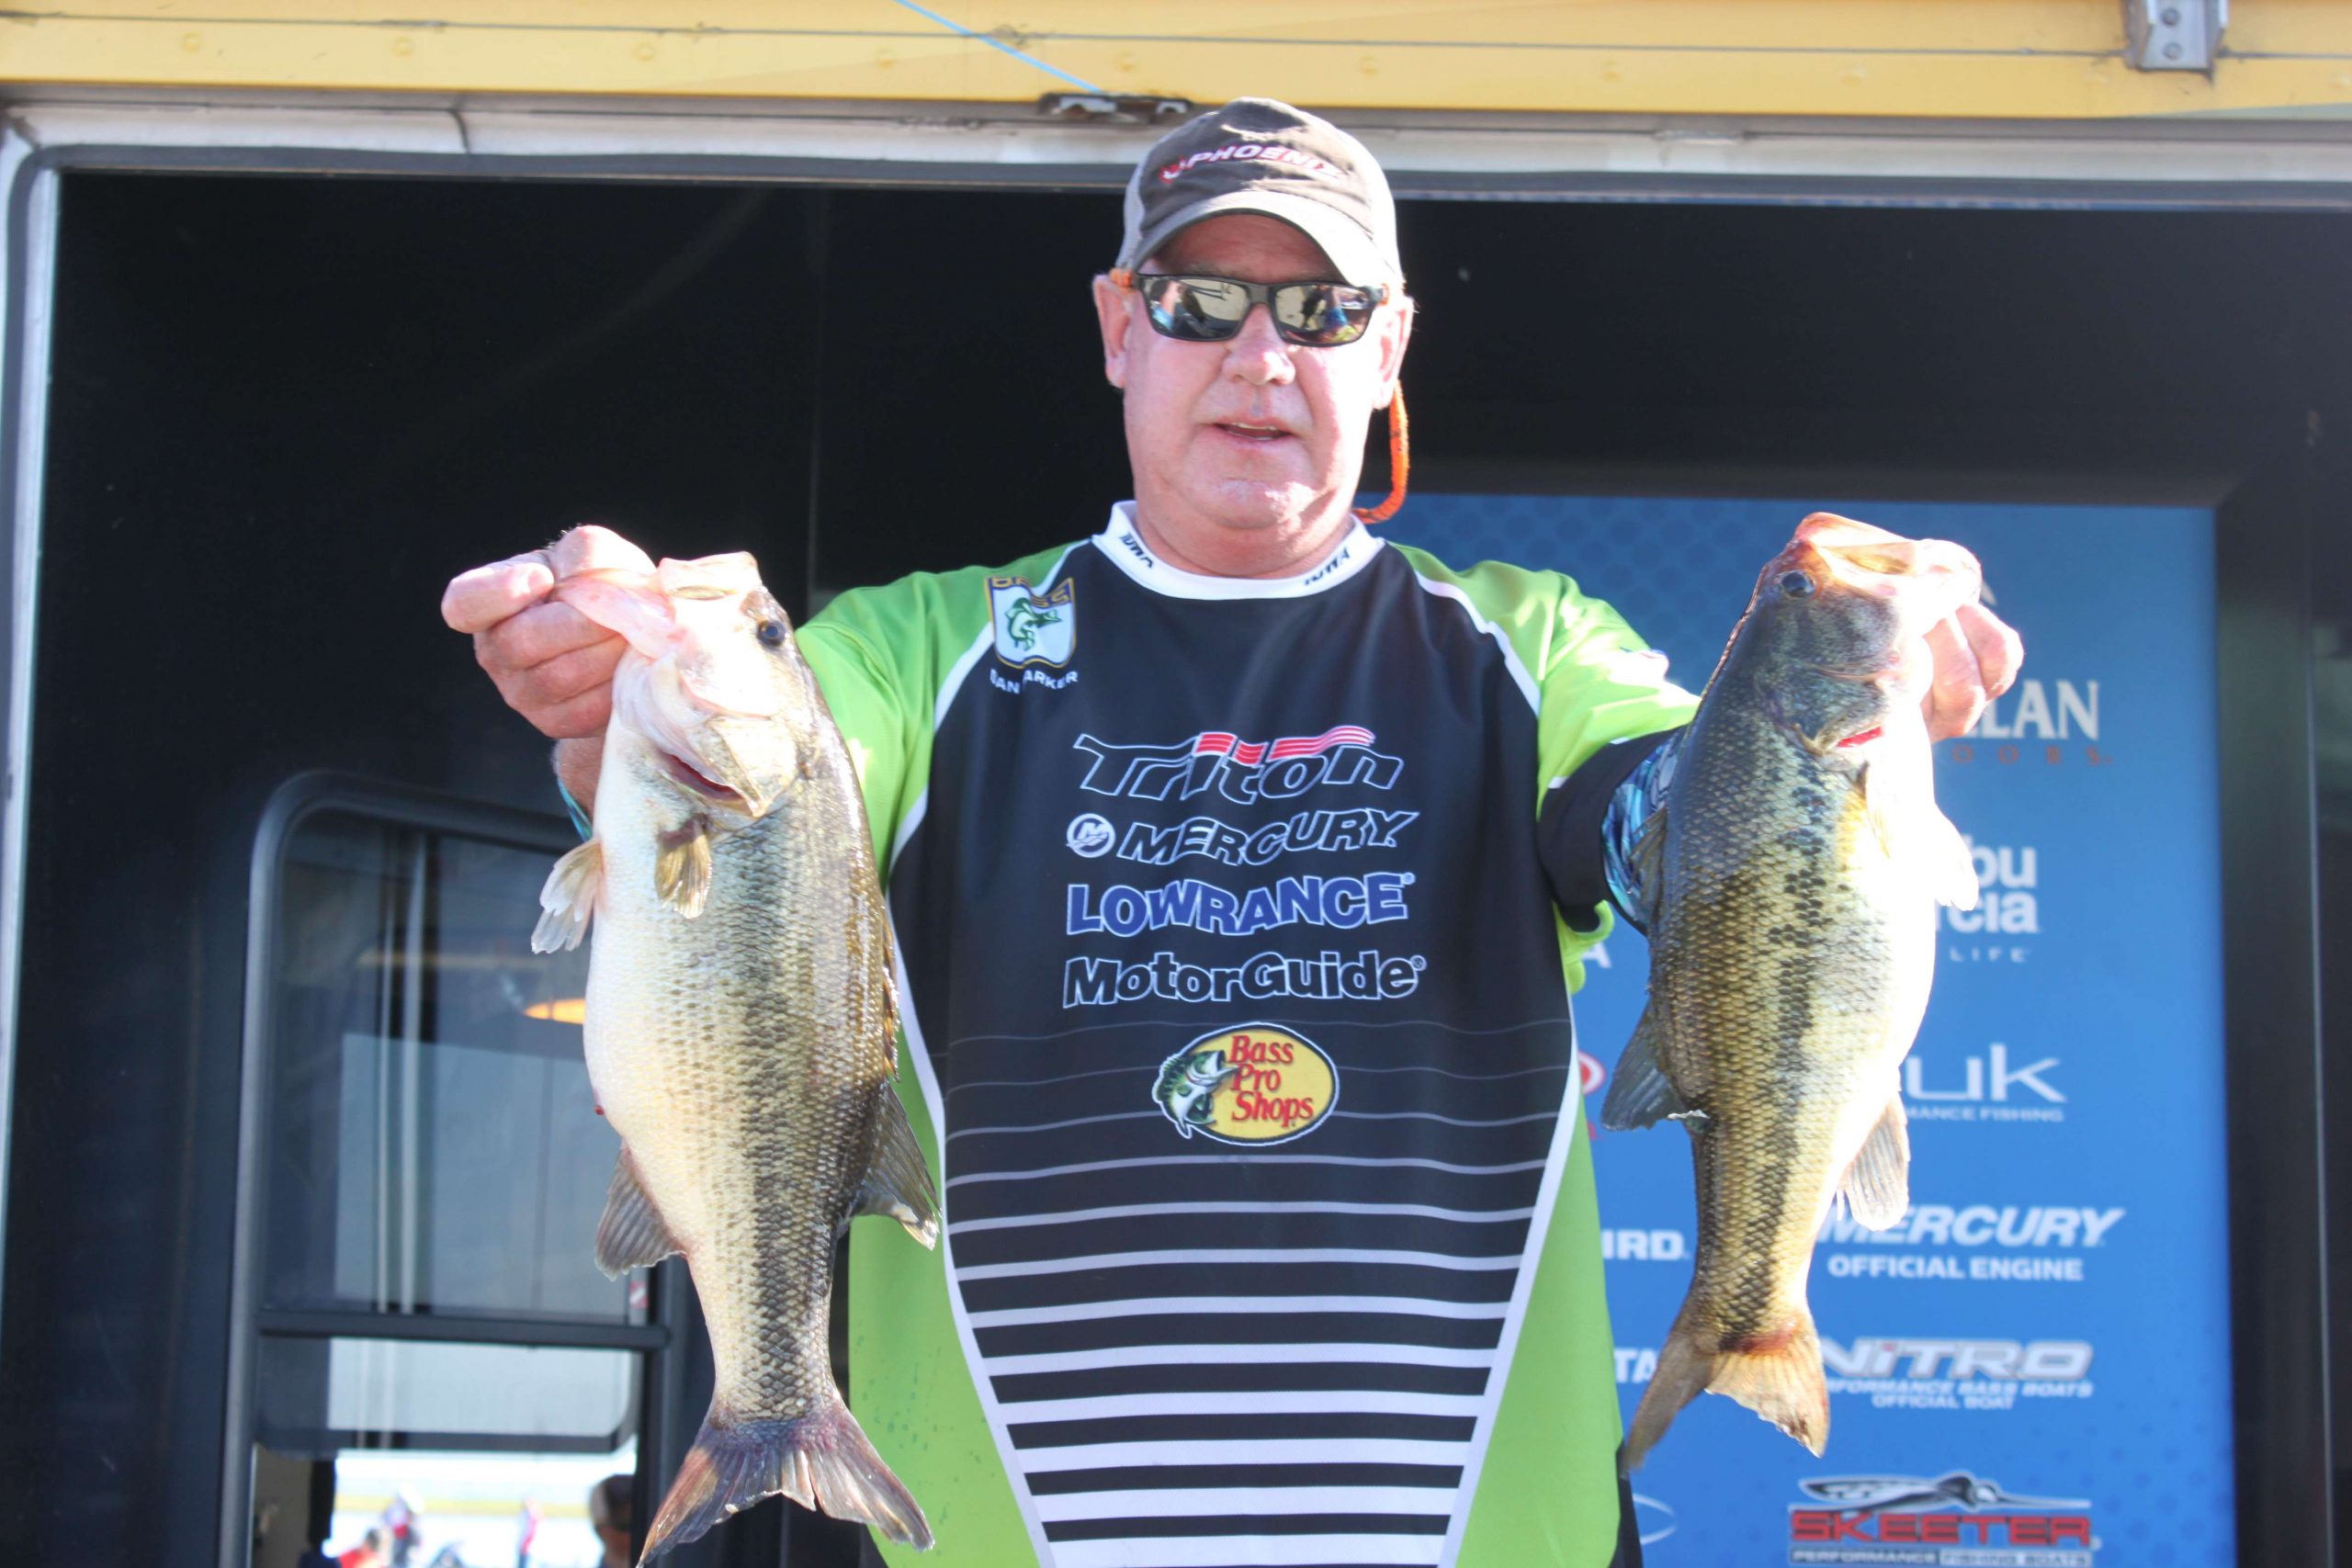  Dan Parker of Iowa is 14th in the boater division with 30-7 over two days.
